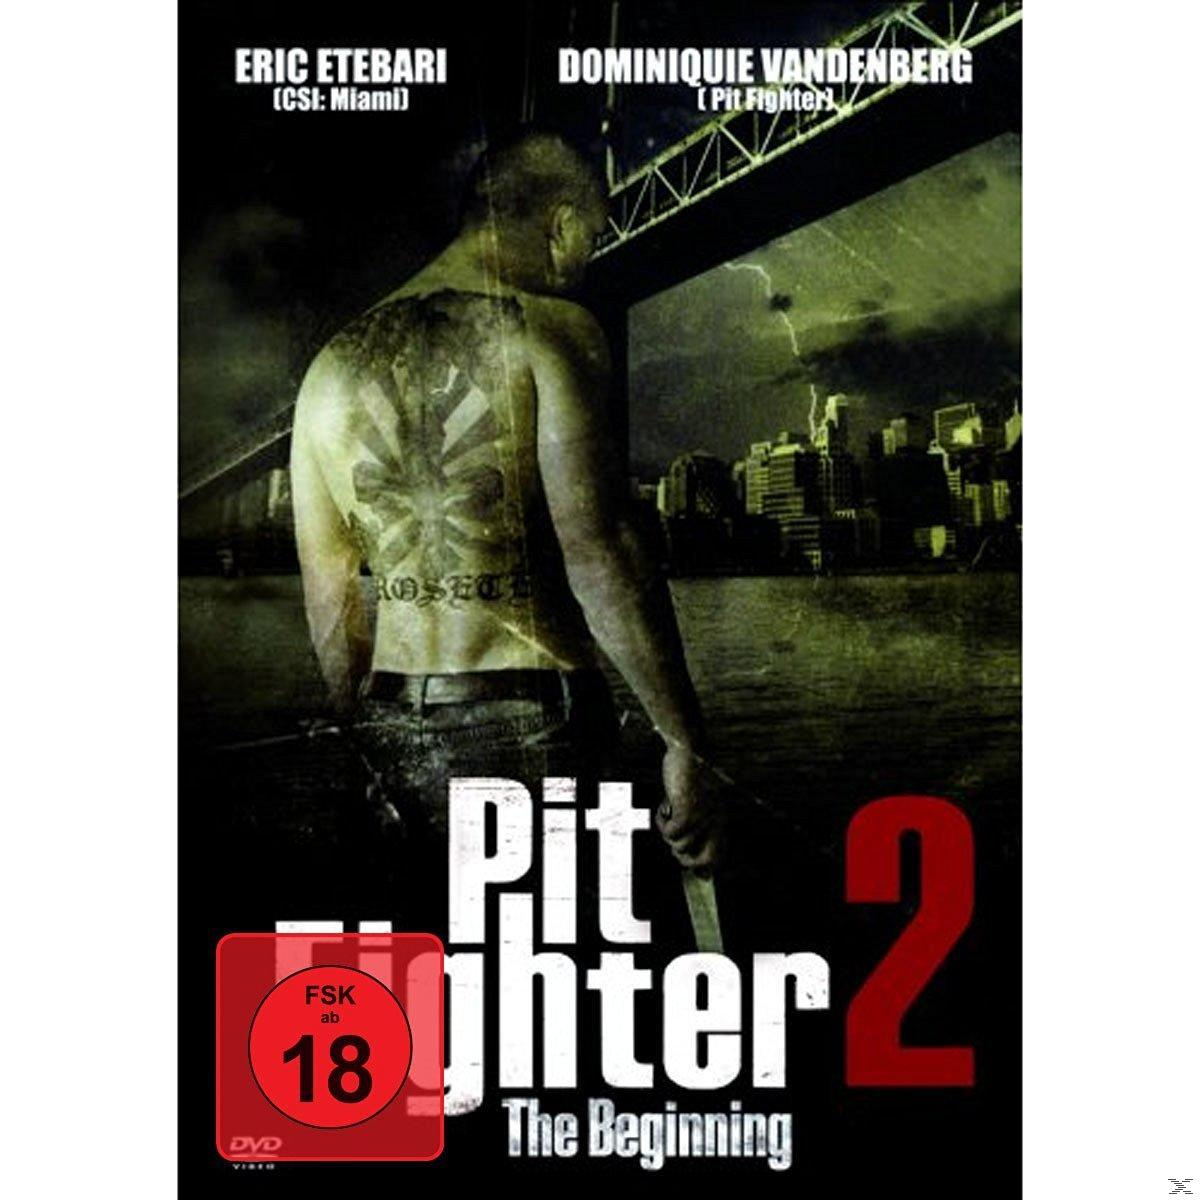 Pit Fighter DVD 2 The Beginning